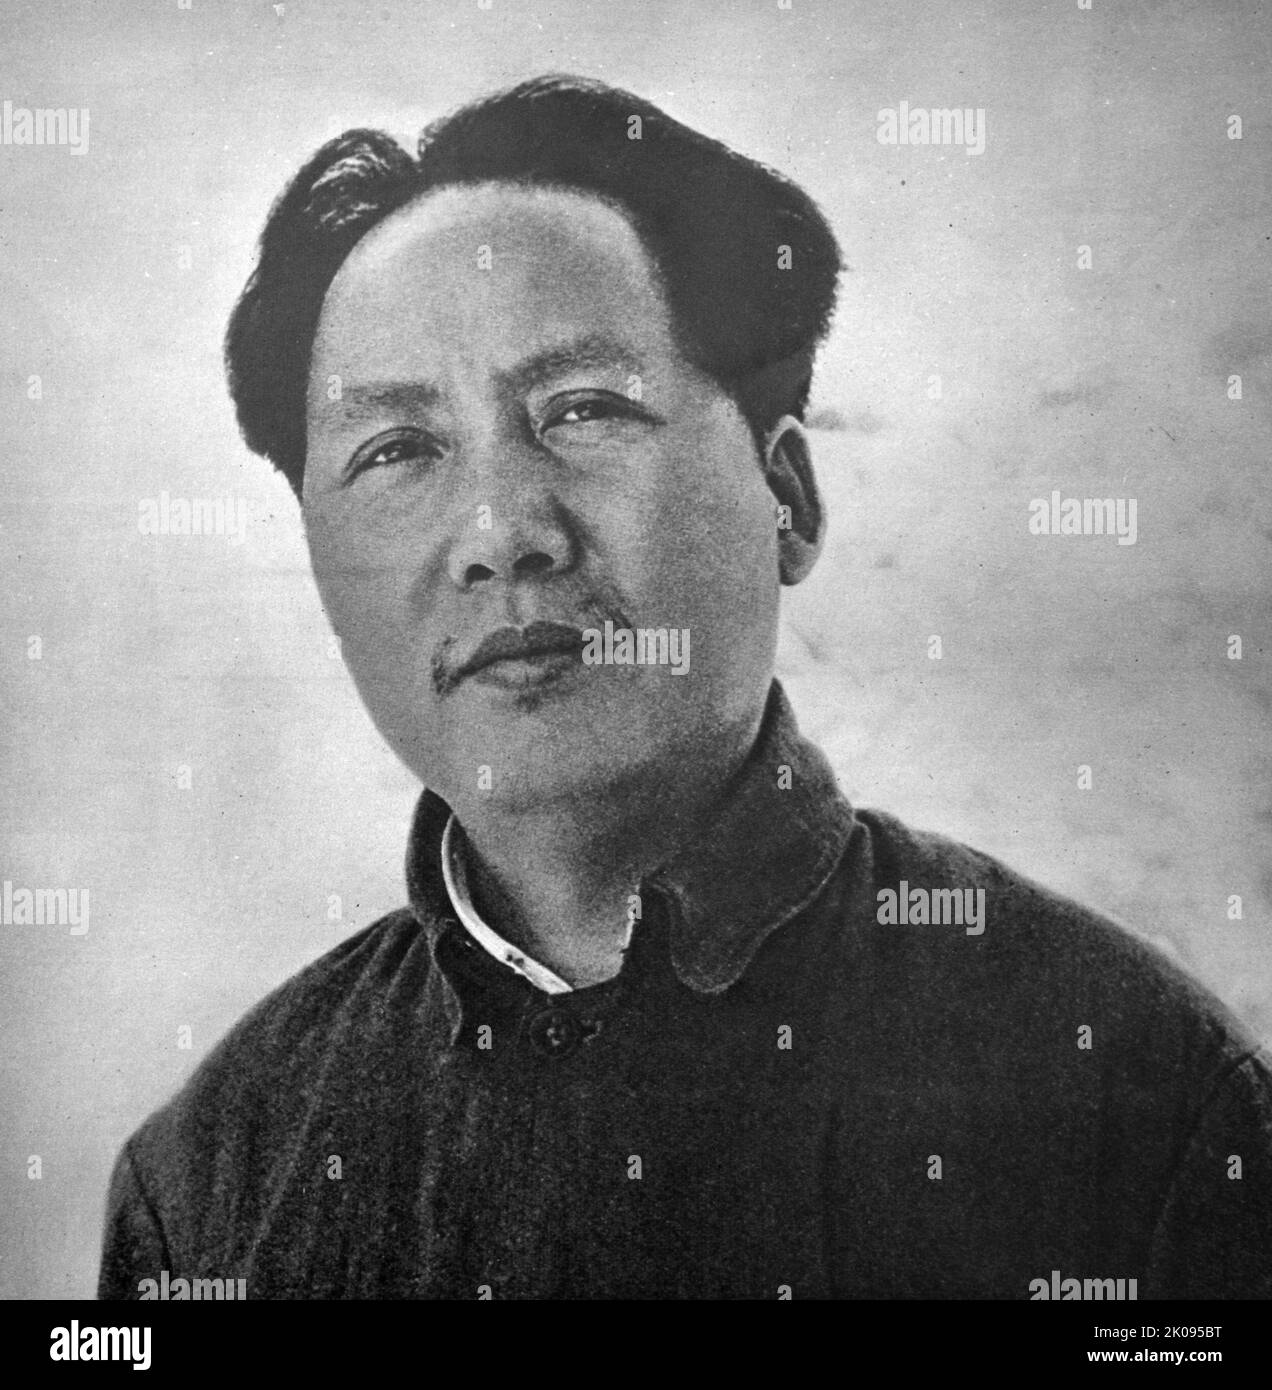 Mao Tse Tsung. Mao Zedong (December 26, 1893 - September 9, 1976), also known as Chairman Mao, was a Chinese communist revolutionary who was the founding father of the People's Republic of China (PRC), which he ruled as the chairman of the Chinese Communist Party from the establishment of the PRC in 1949 until his death in 1976. Stock Photo